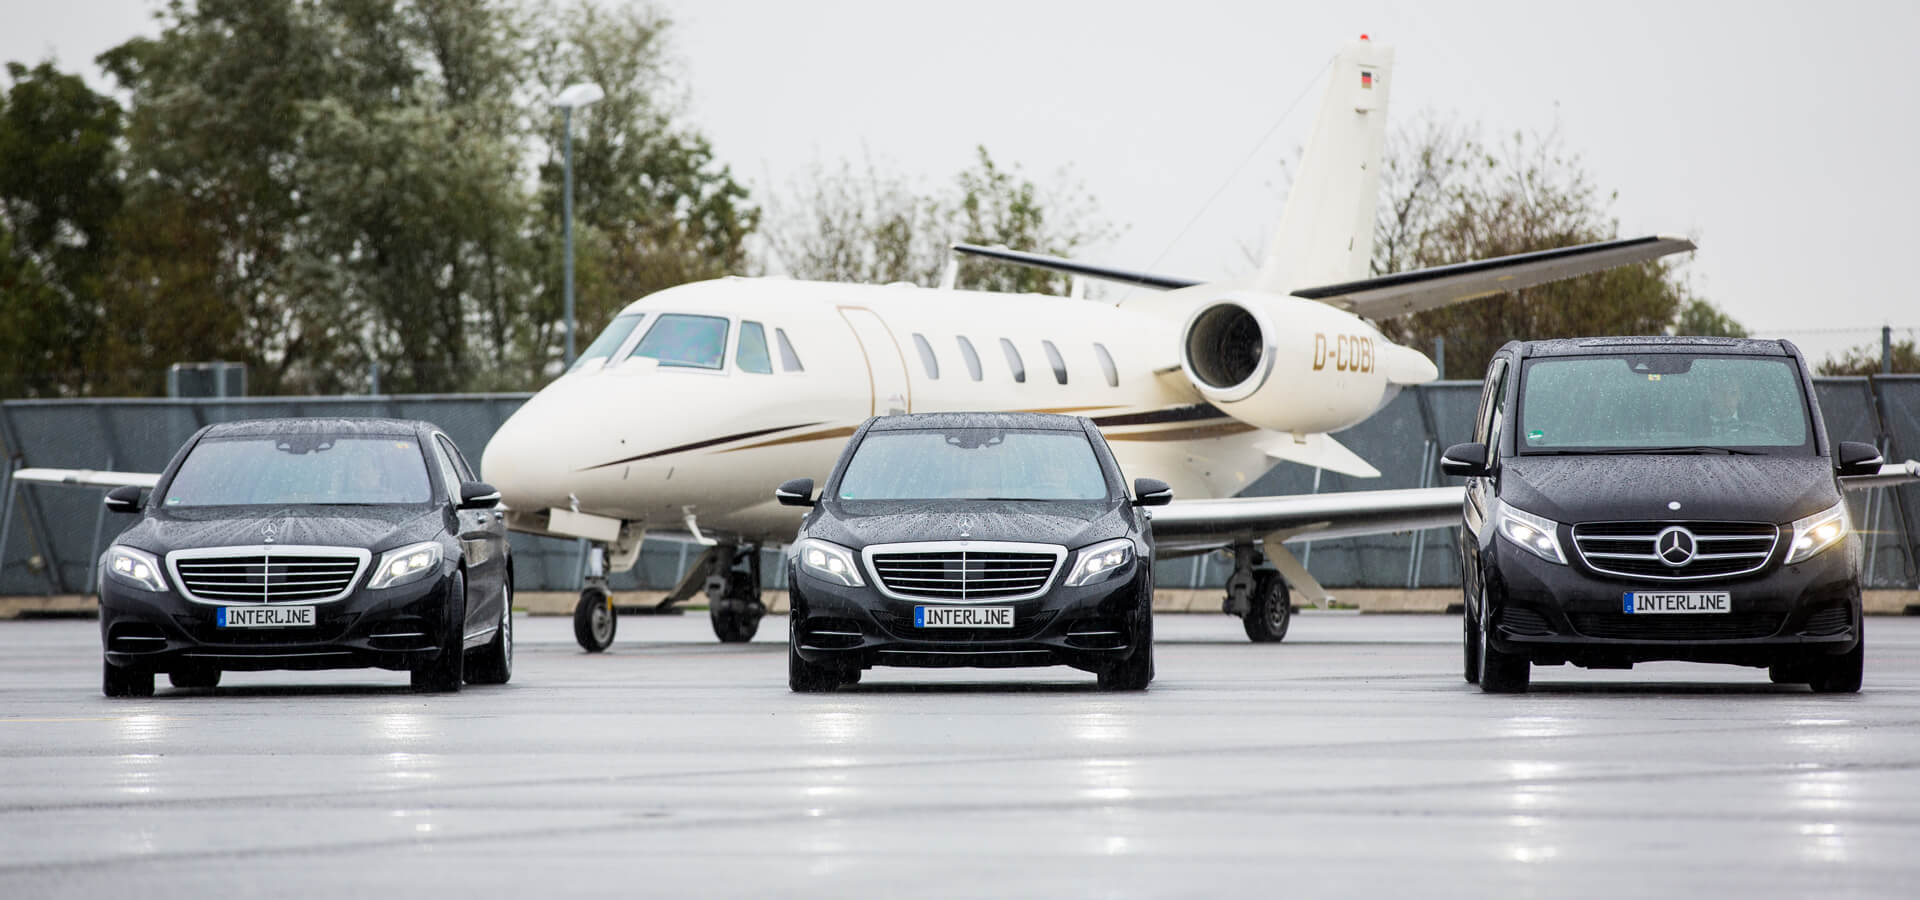 Best Executive Chauffeur Service in Solihull